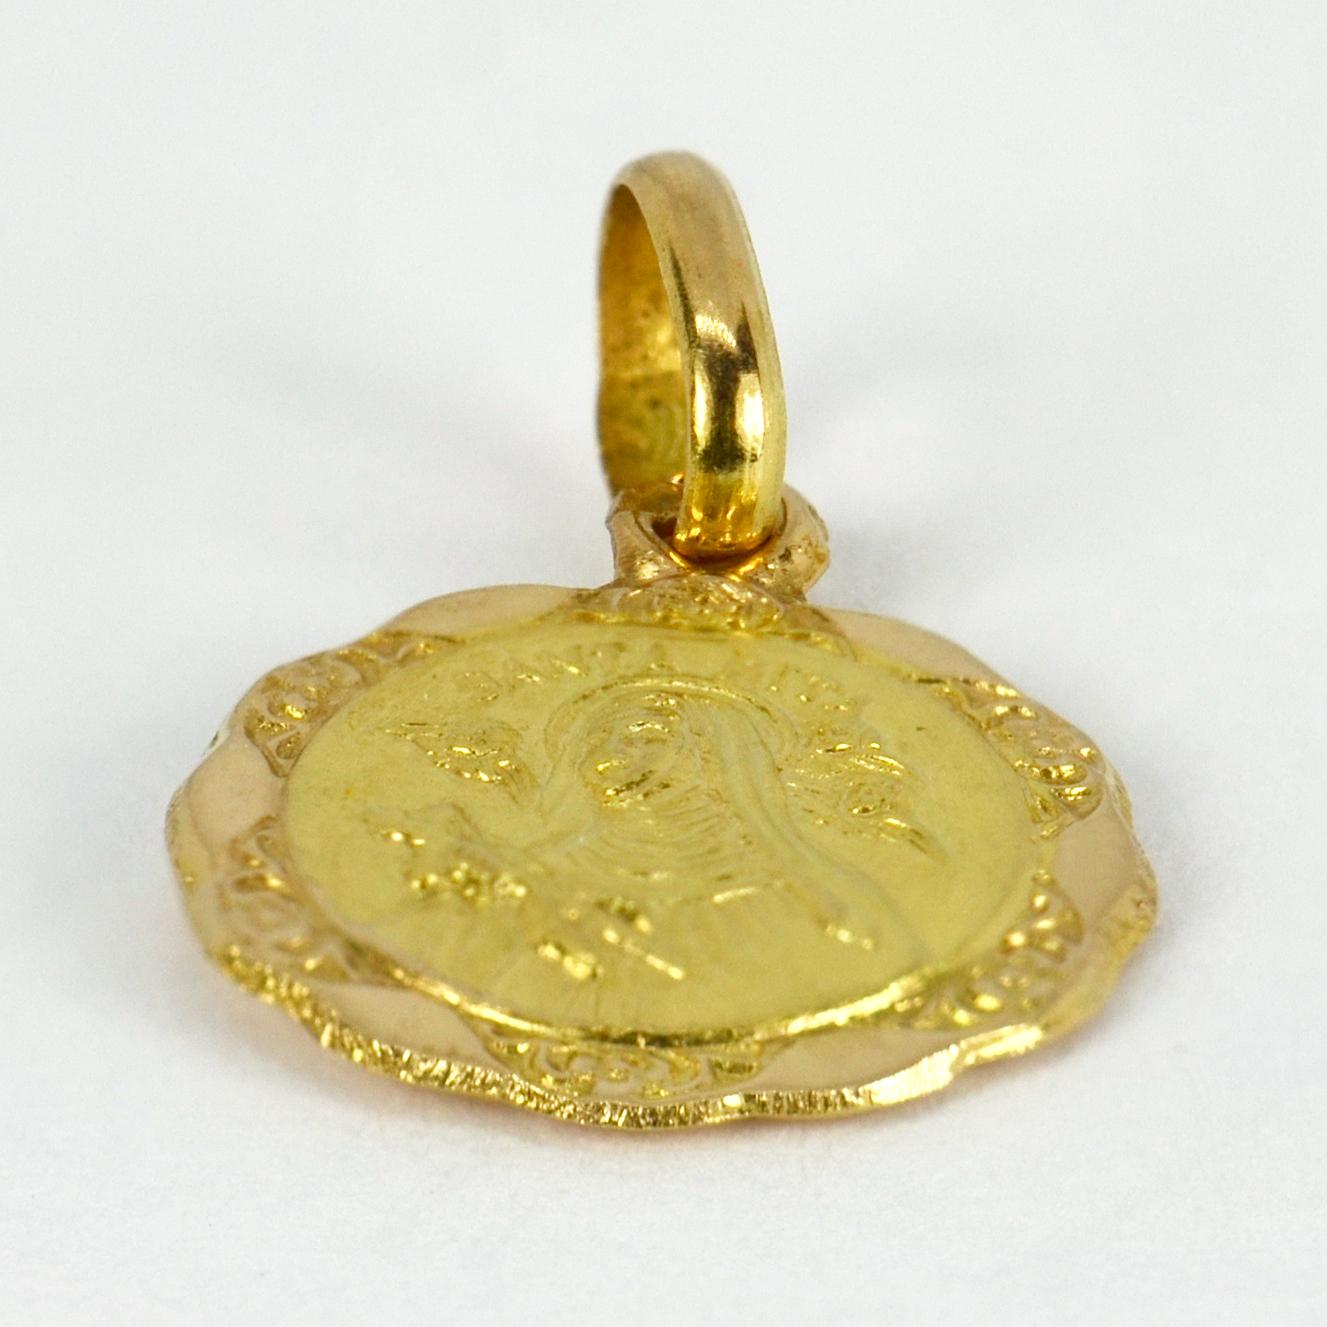 An Italian 18 karat (18K) yellow gold charm pendant designed as a medal depicting Saint Rita holding a crucifix and surrounded by cherubs. Saint Rita is known as the Patroness of Impossible Causes, and in many Catholic countries is considered to be